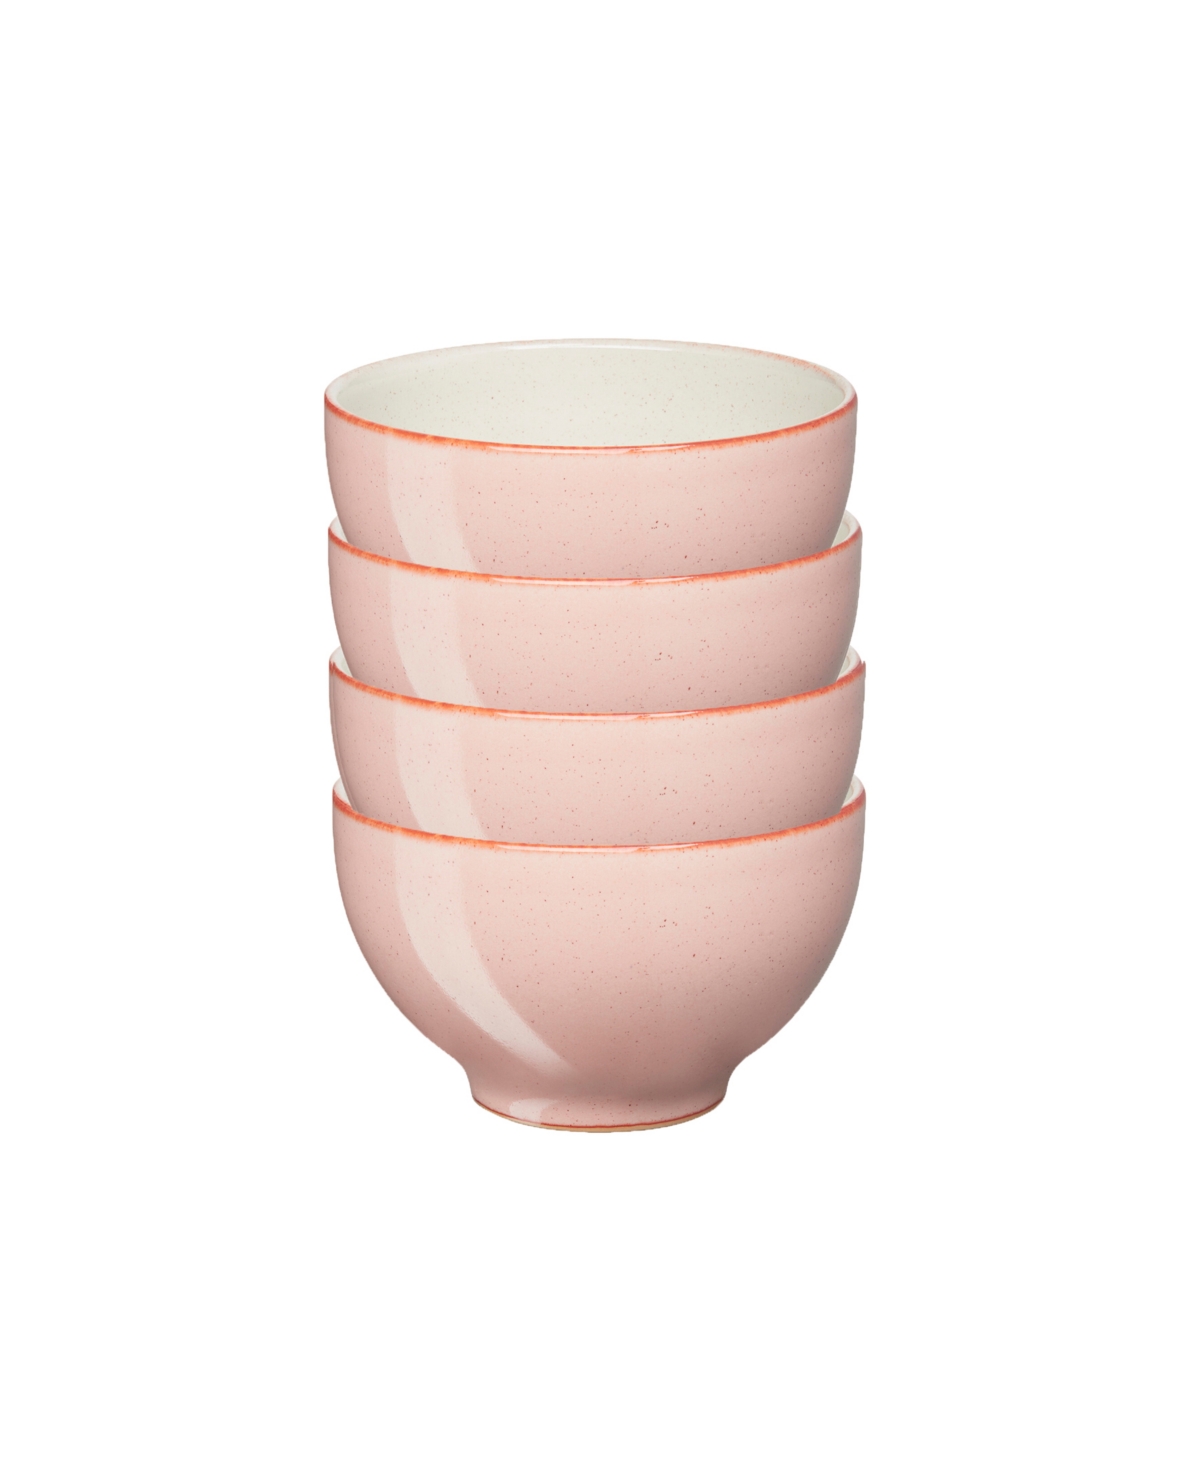 Heritage Piazza Small Bowl Set of 4, Service for 4 - Pink